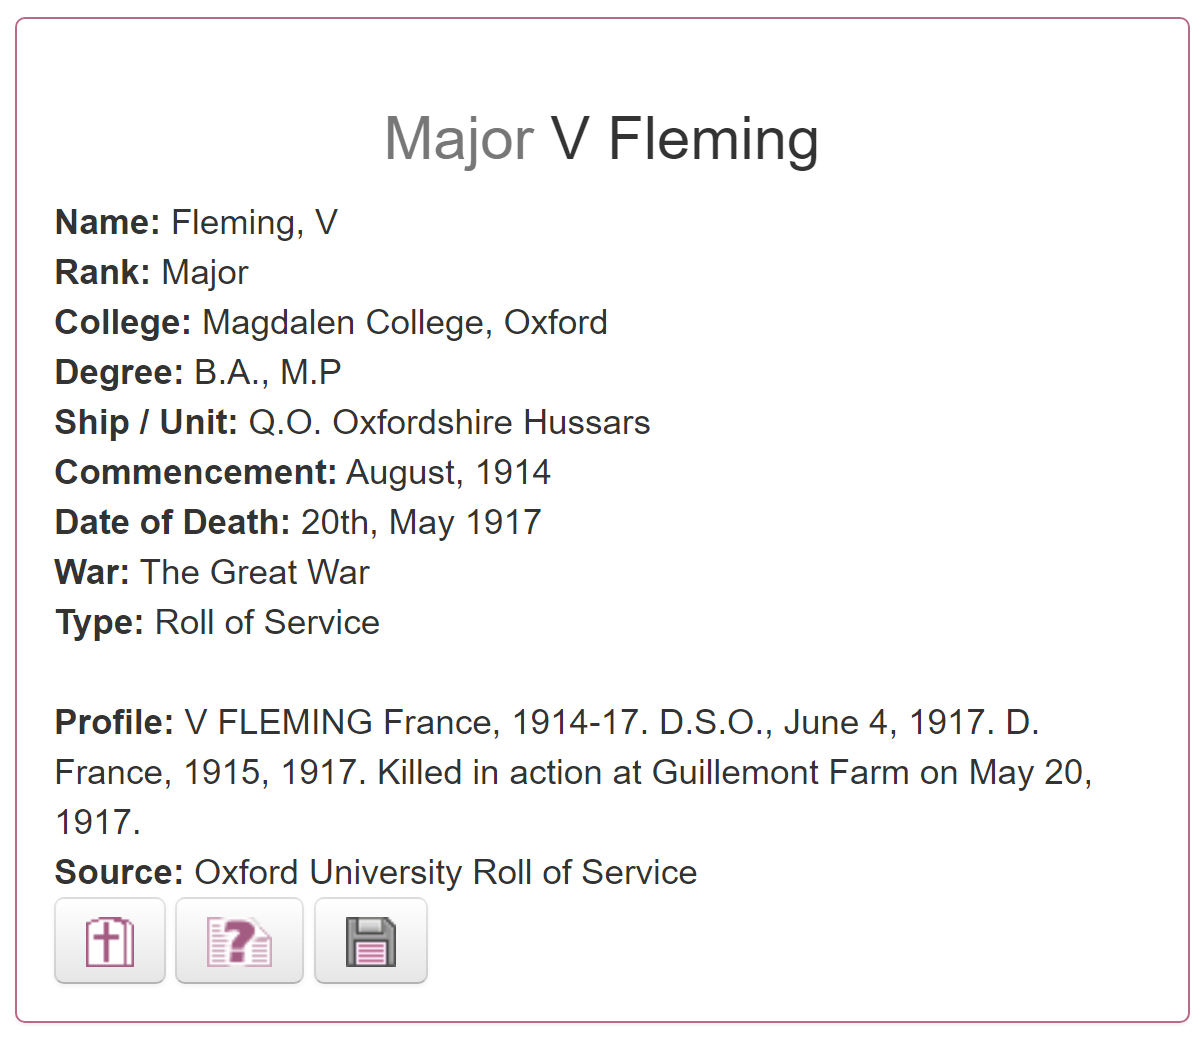 Valentine Fleming in the Oxford University Roll of Service